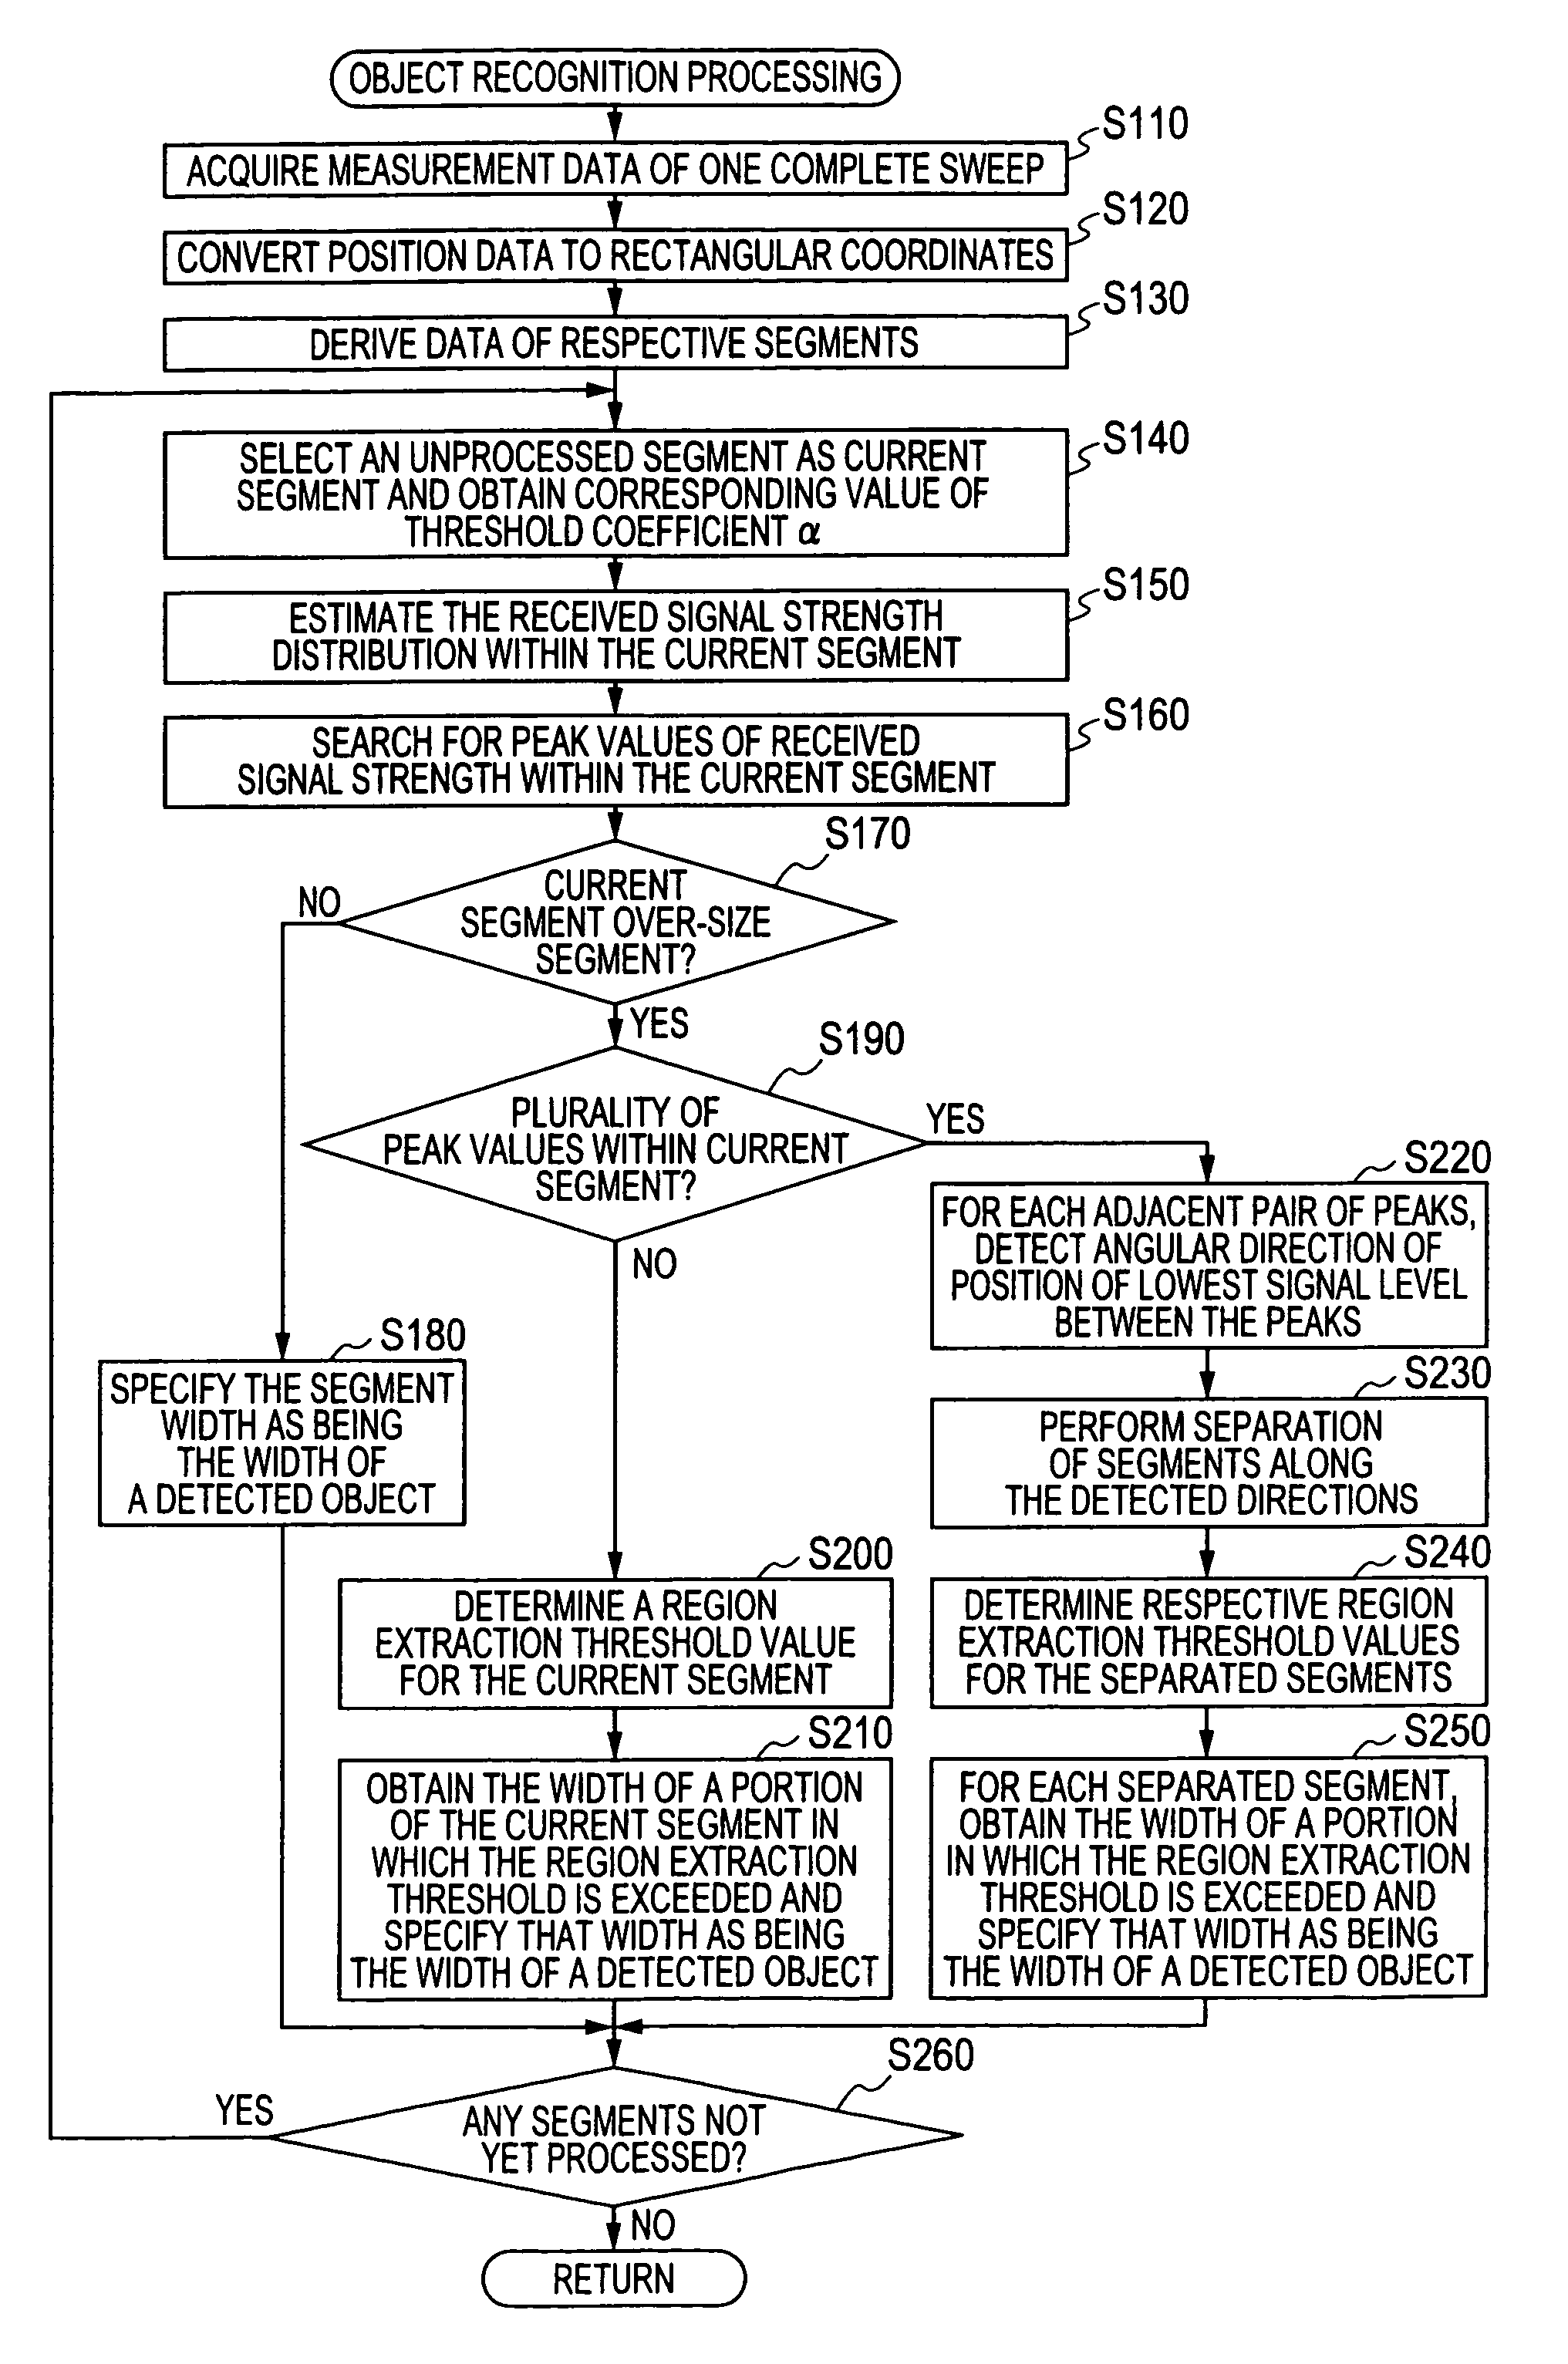 Object recognition apparatus utilizing beam scanning for detecting widths of objects of various sizes and located at various ranges